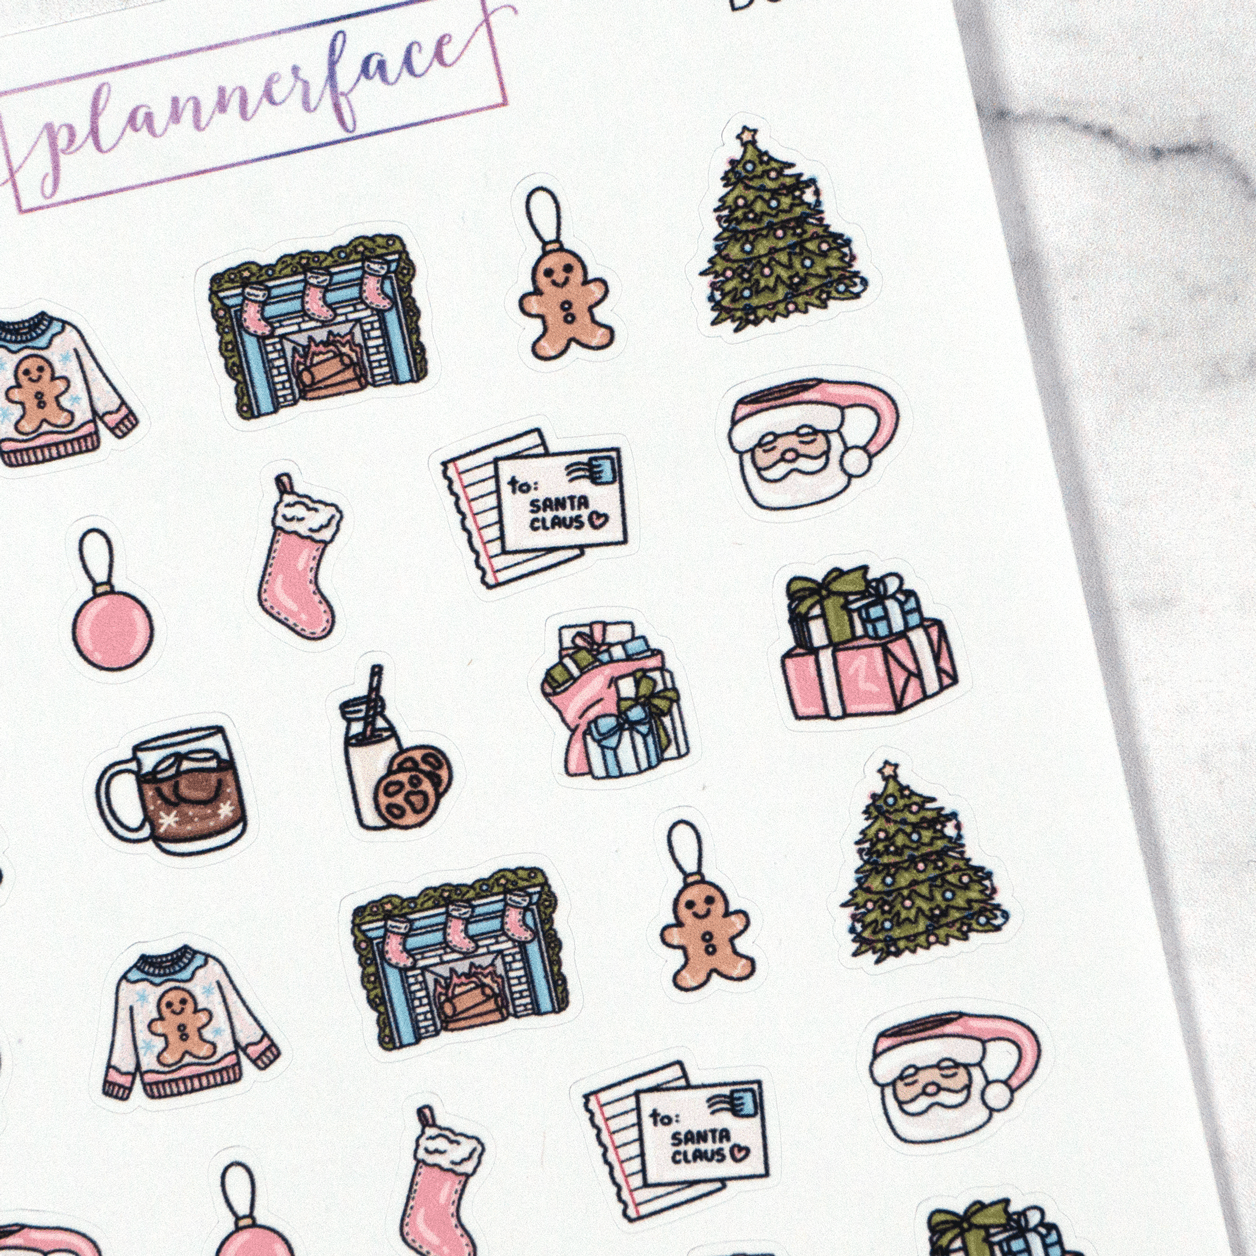 Christmas Doodle Sampler (Pink) by Plannerface